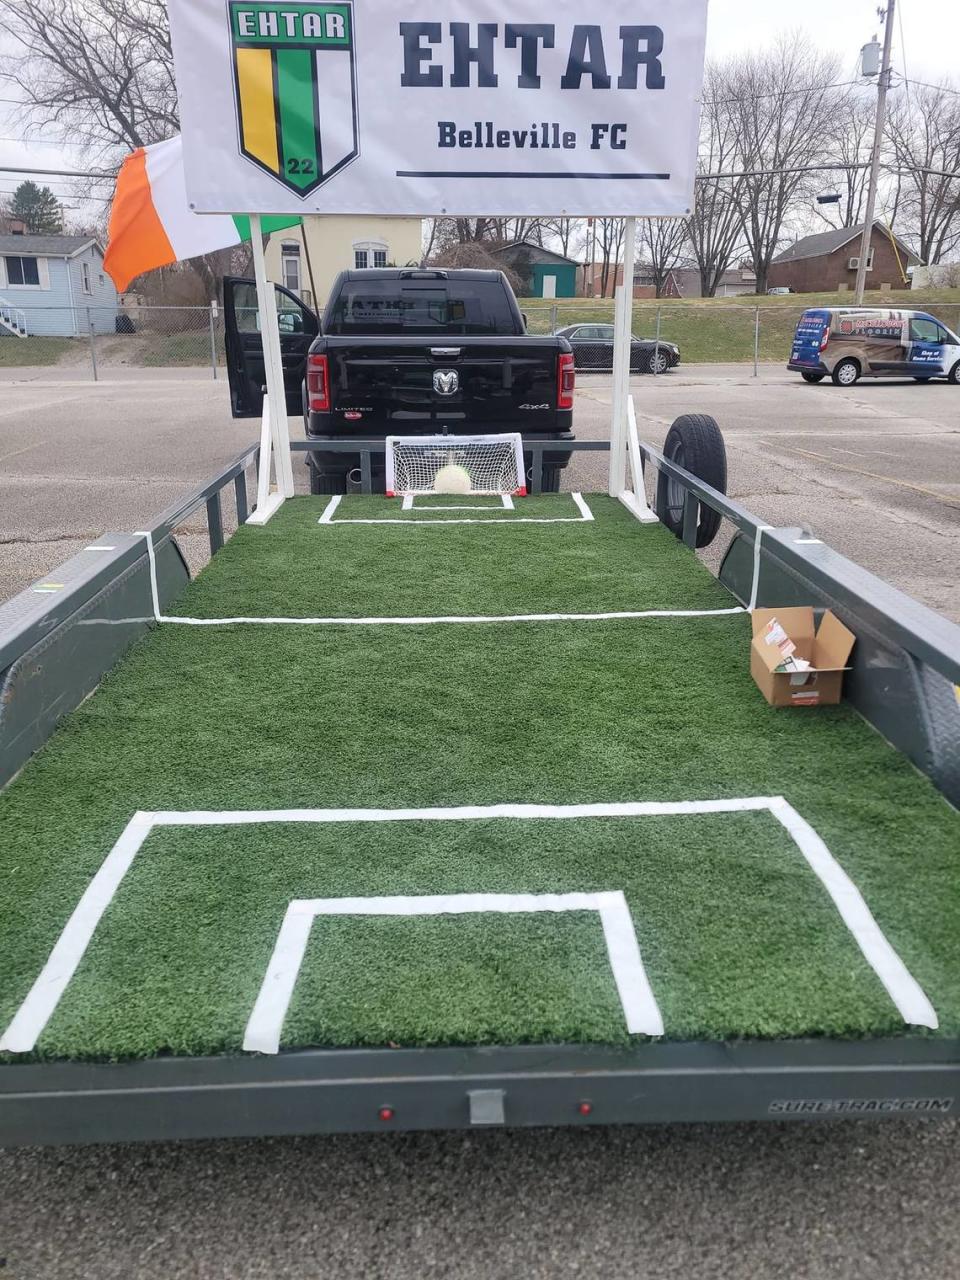 Ehtar Belleville F.C. had a float in the recent St. Patrick’s Day parade in downtown Belleville. The club will begin its inaugural season in May.